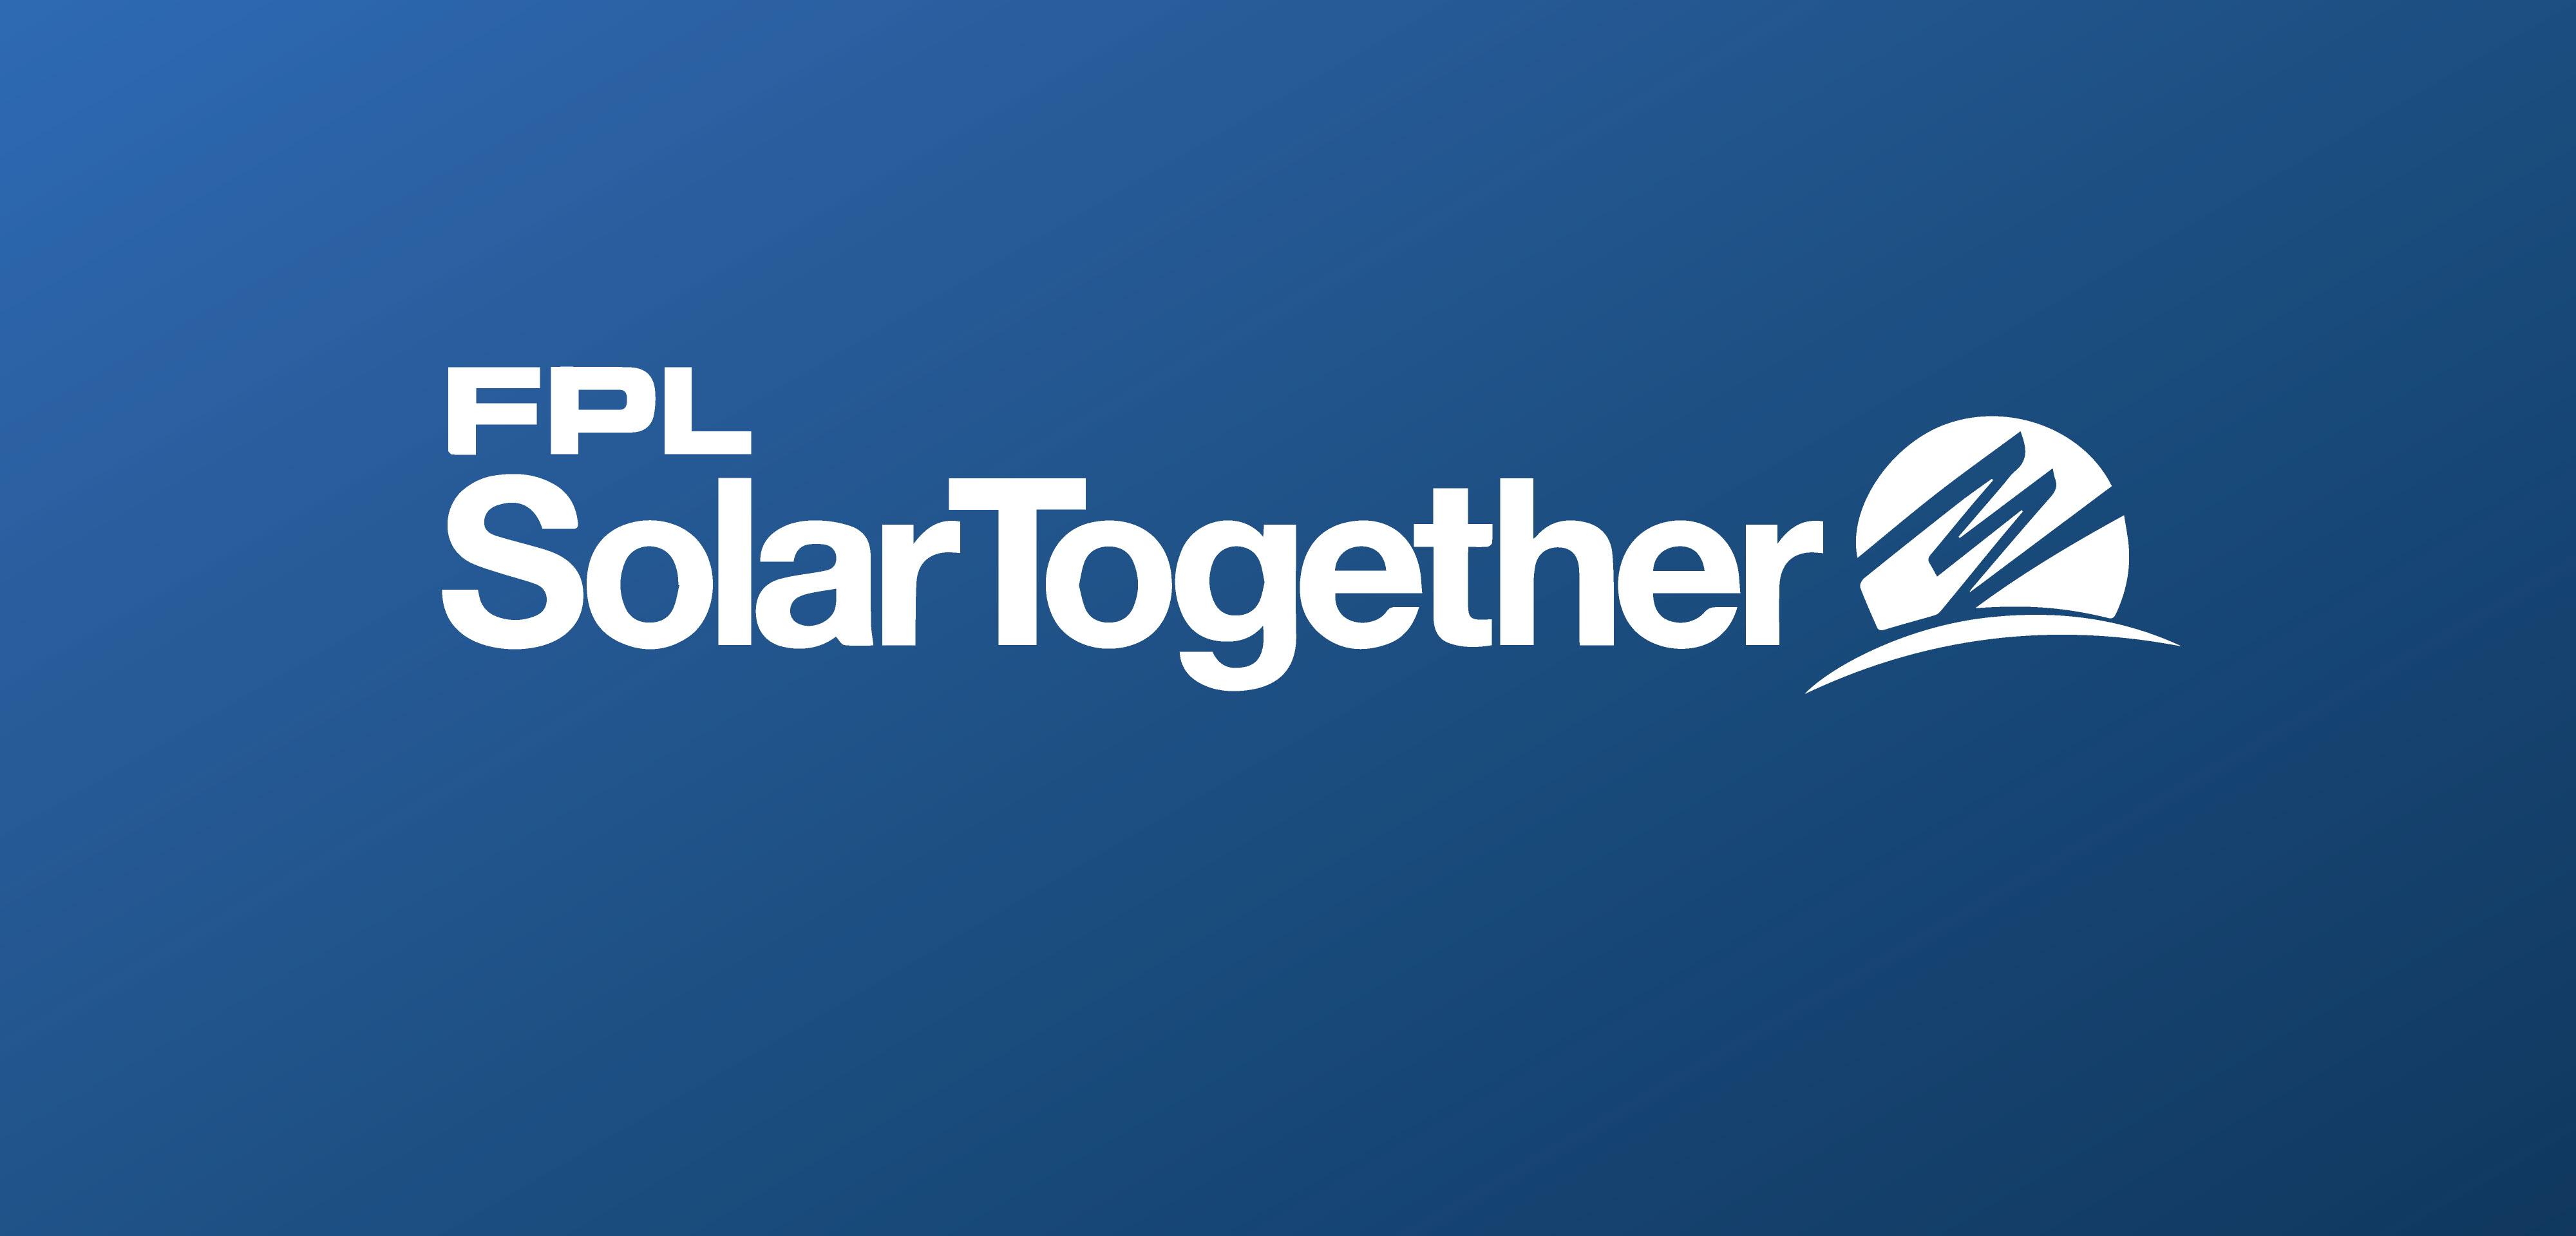 The FPL SolarTogether Program: Is it worth it?